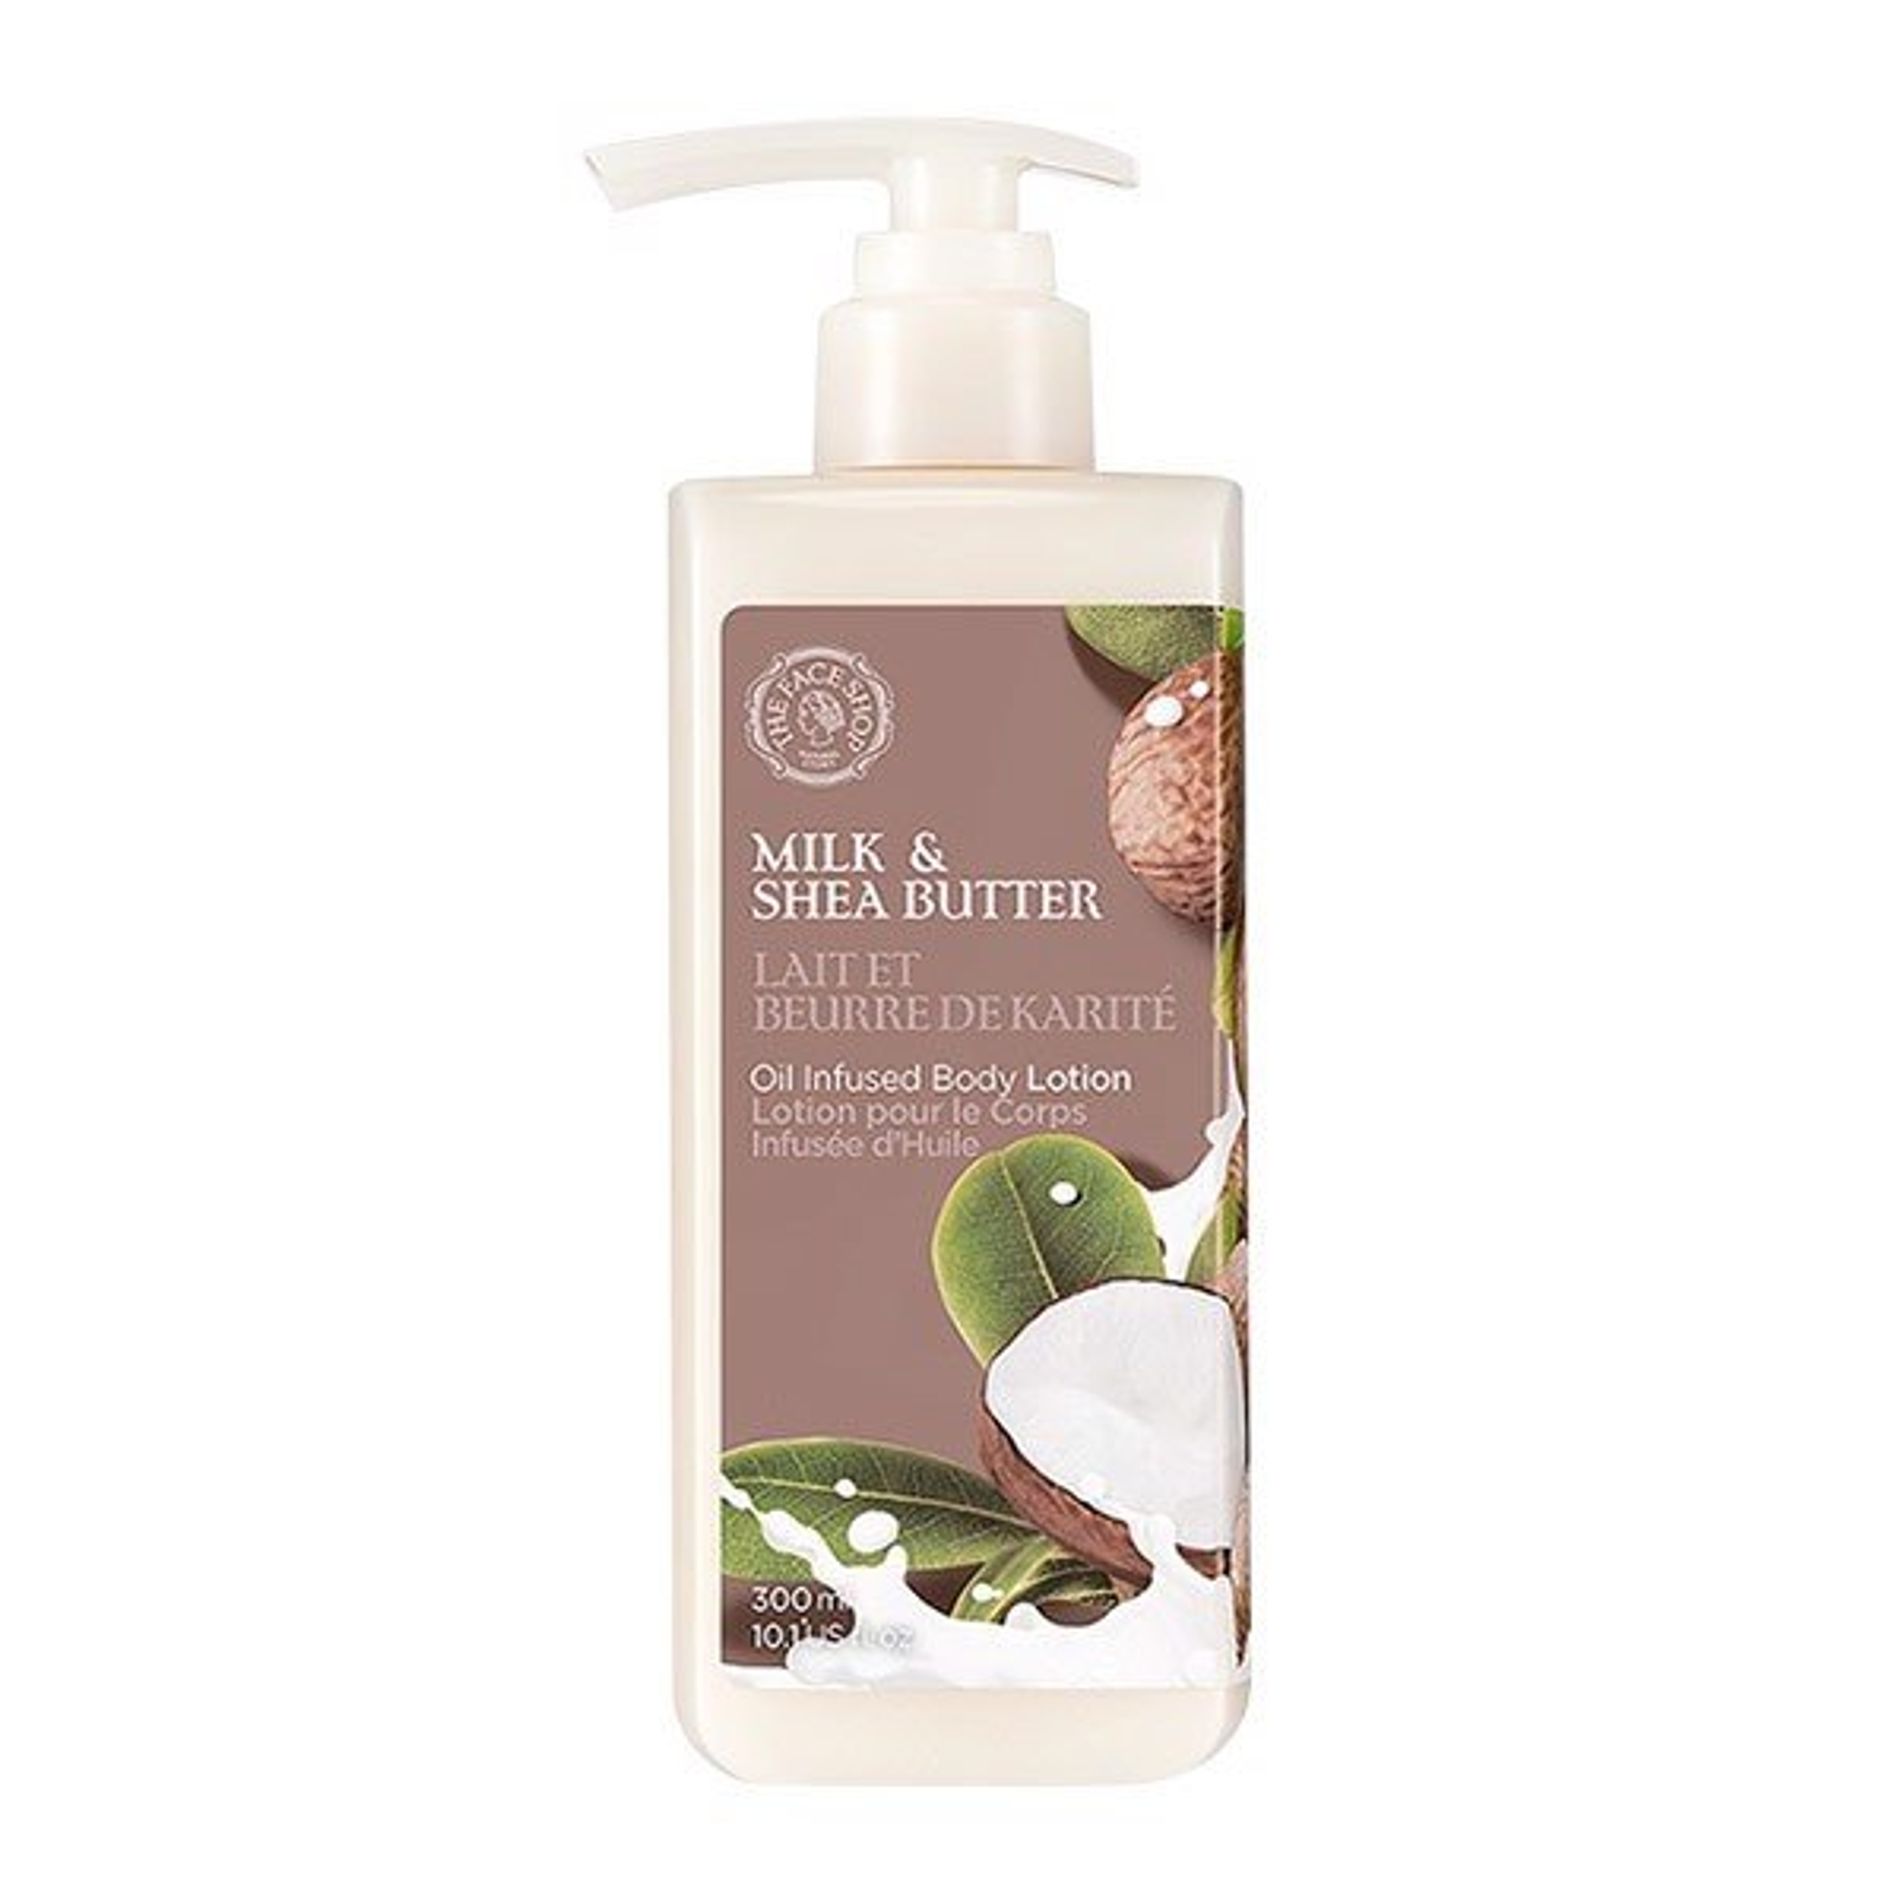 sua-duong-the-milk-shea-butter-oil-infused-body-lotion-300ml-2